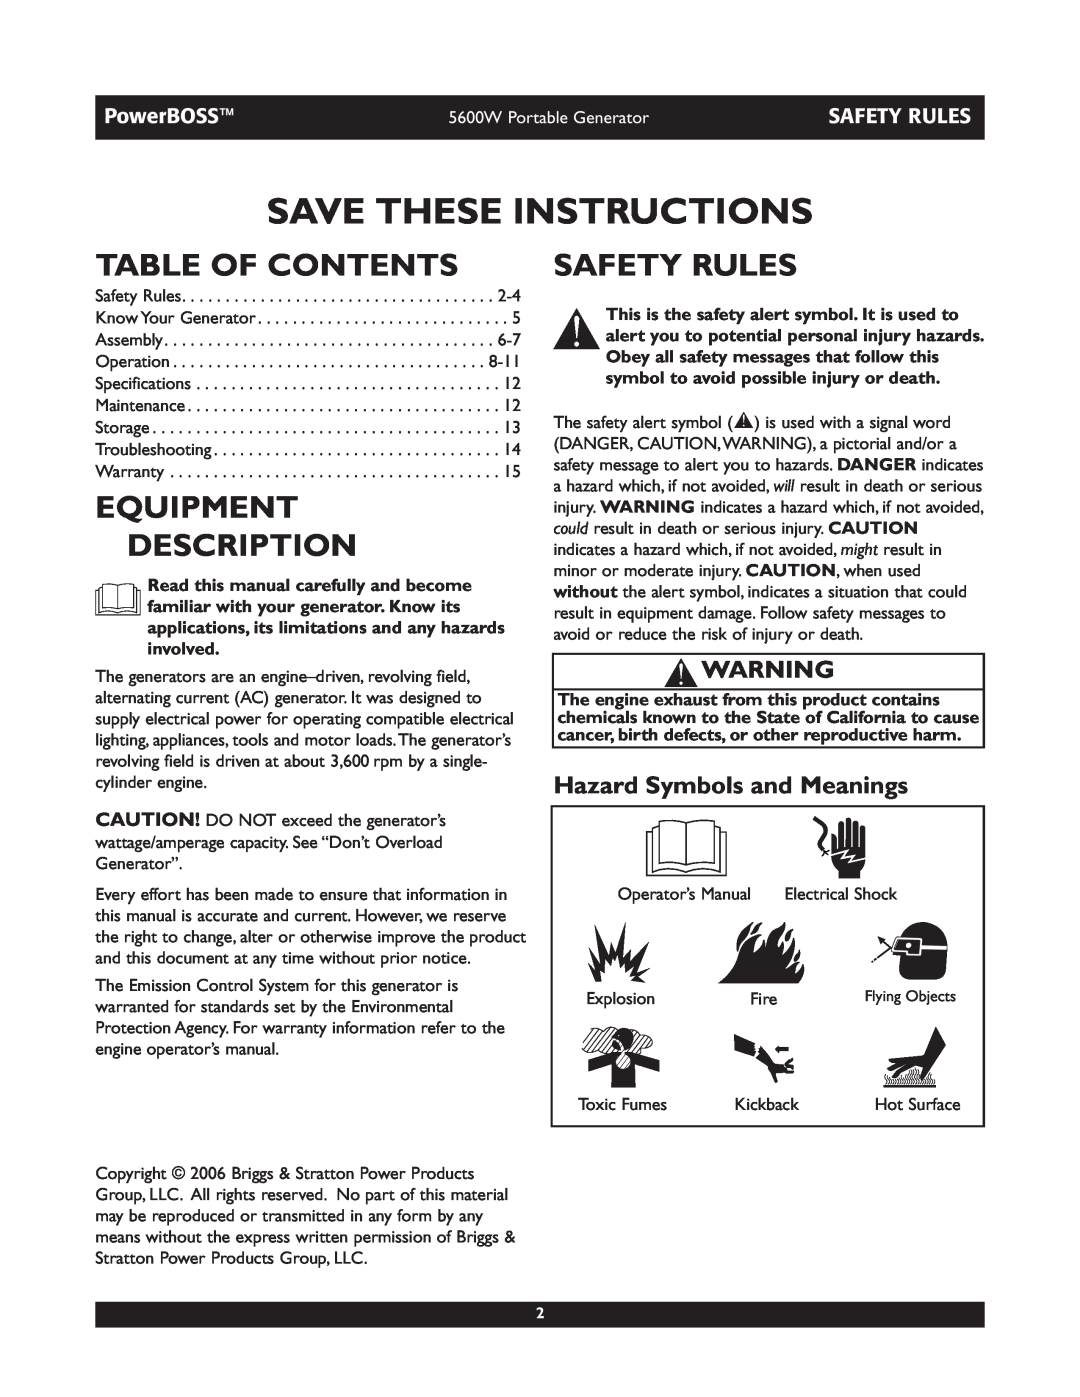 Briggs & Stratton 30230 Table Of Contents, Equipment Description, Safety Rules, Hazard Symbols and Meanings, PowerBOSS 